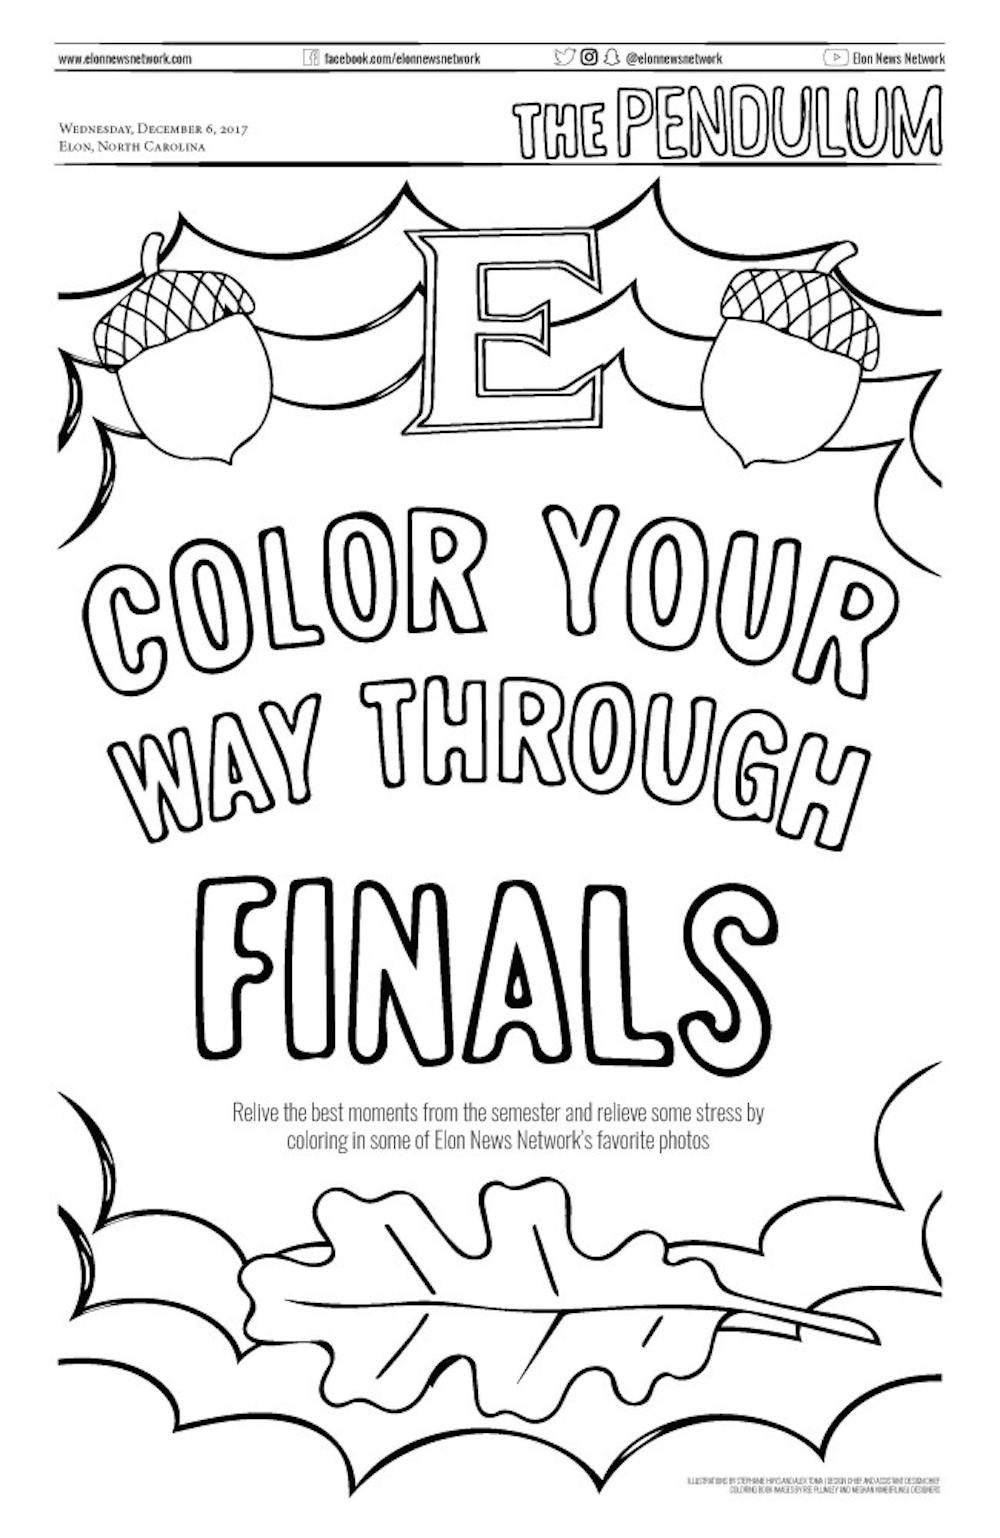 Color your way through finals with ENN's coloring book - Elon News Network